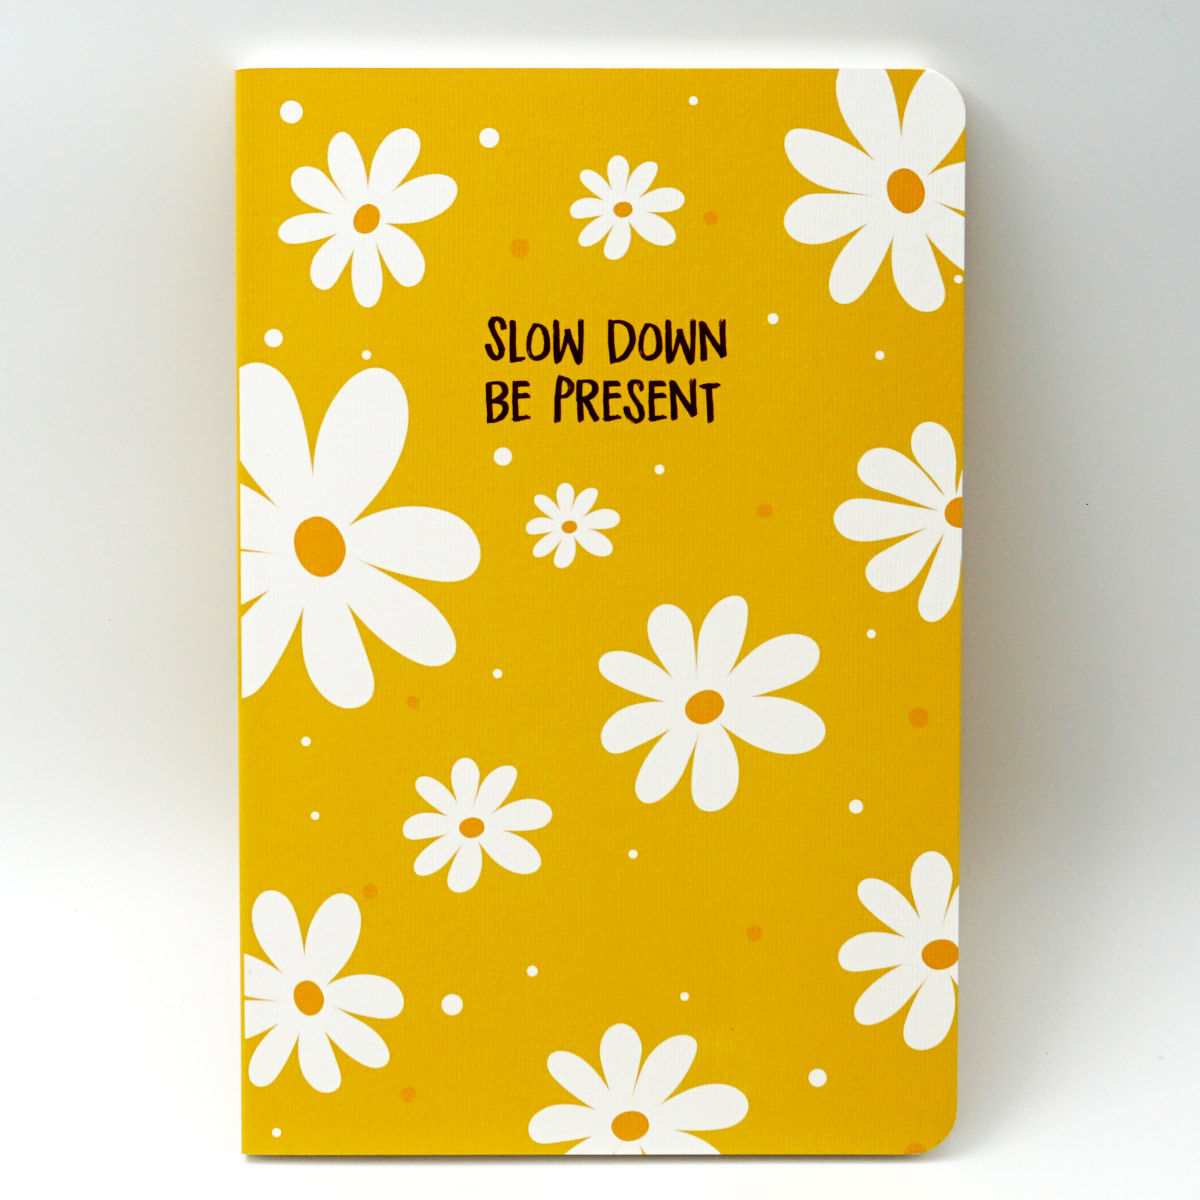 Factor A5 yellow Color with White Follower Design Soft Bound Ruled Notebook 90 GSM With 160 Pages SKU 50229